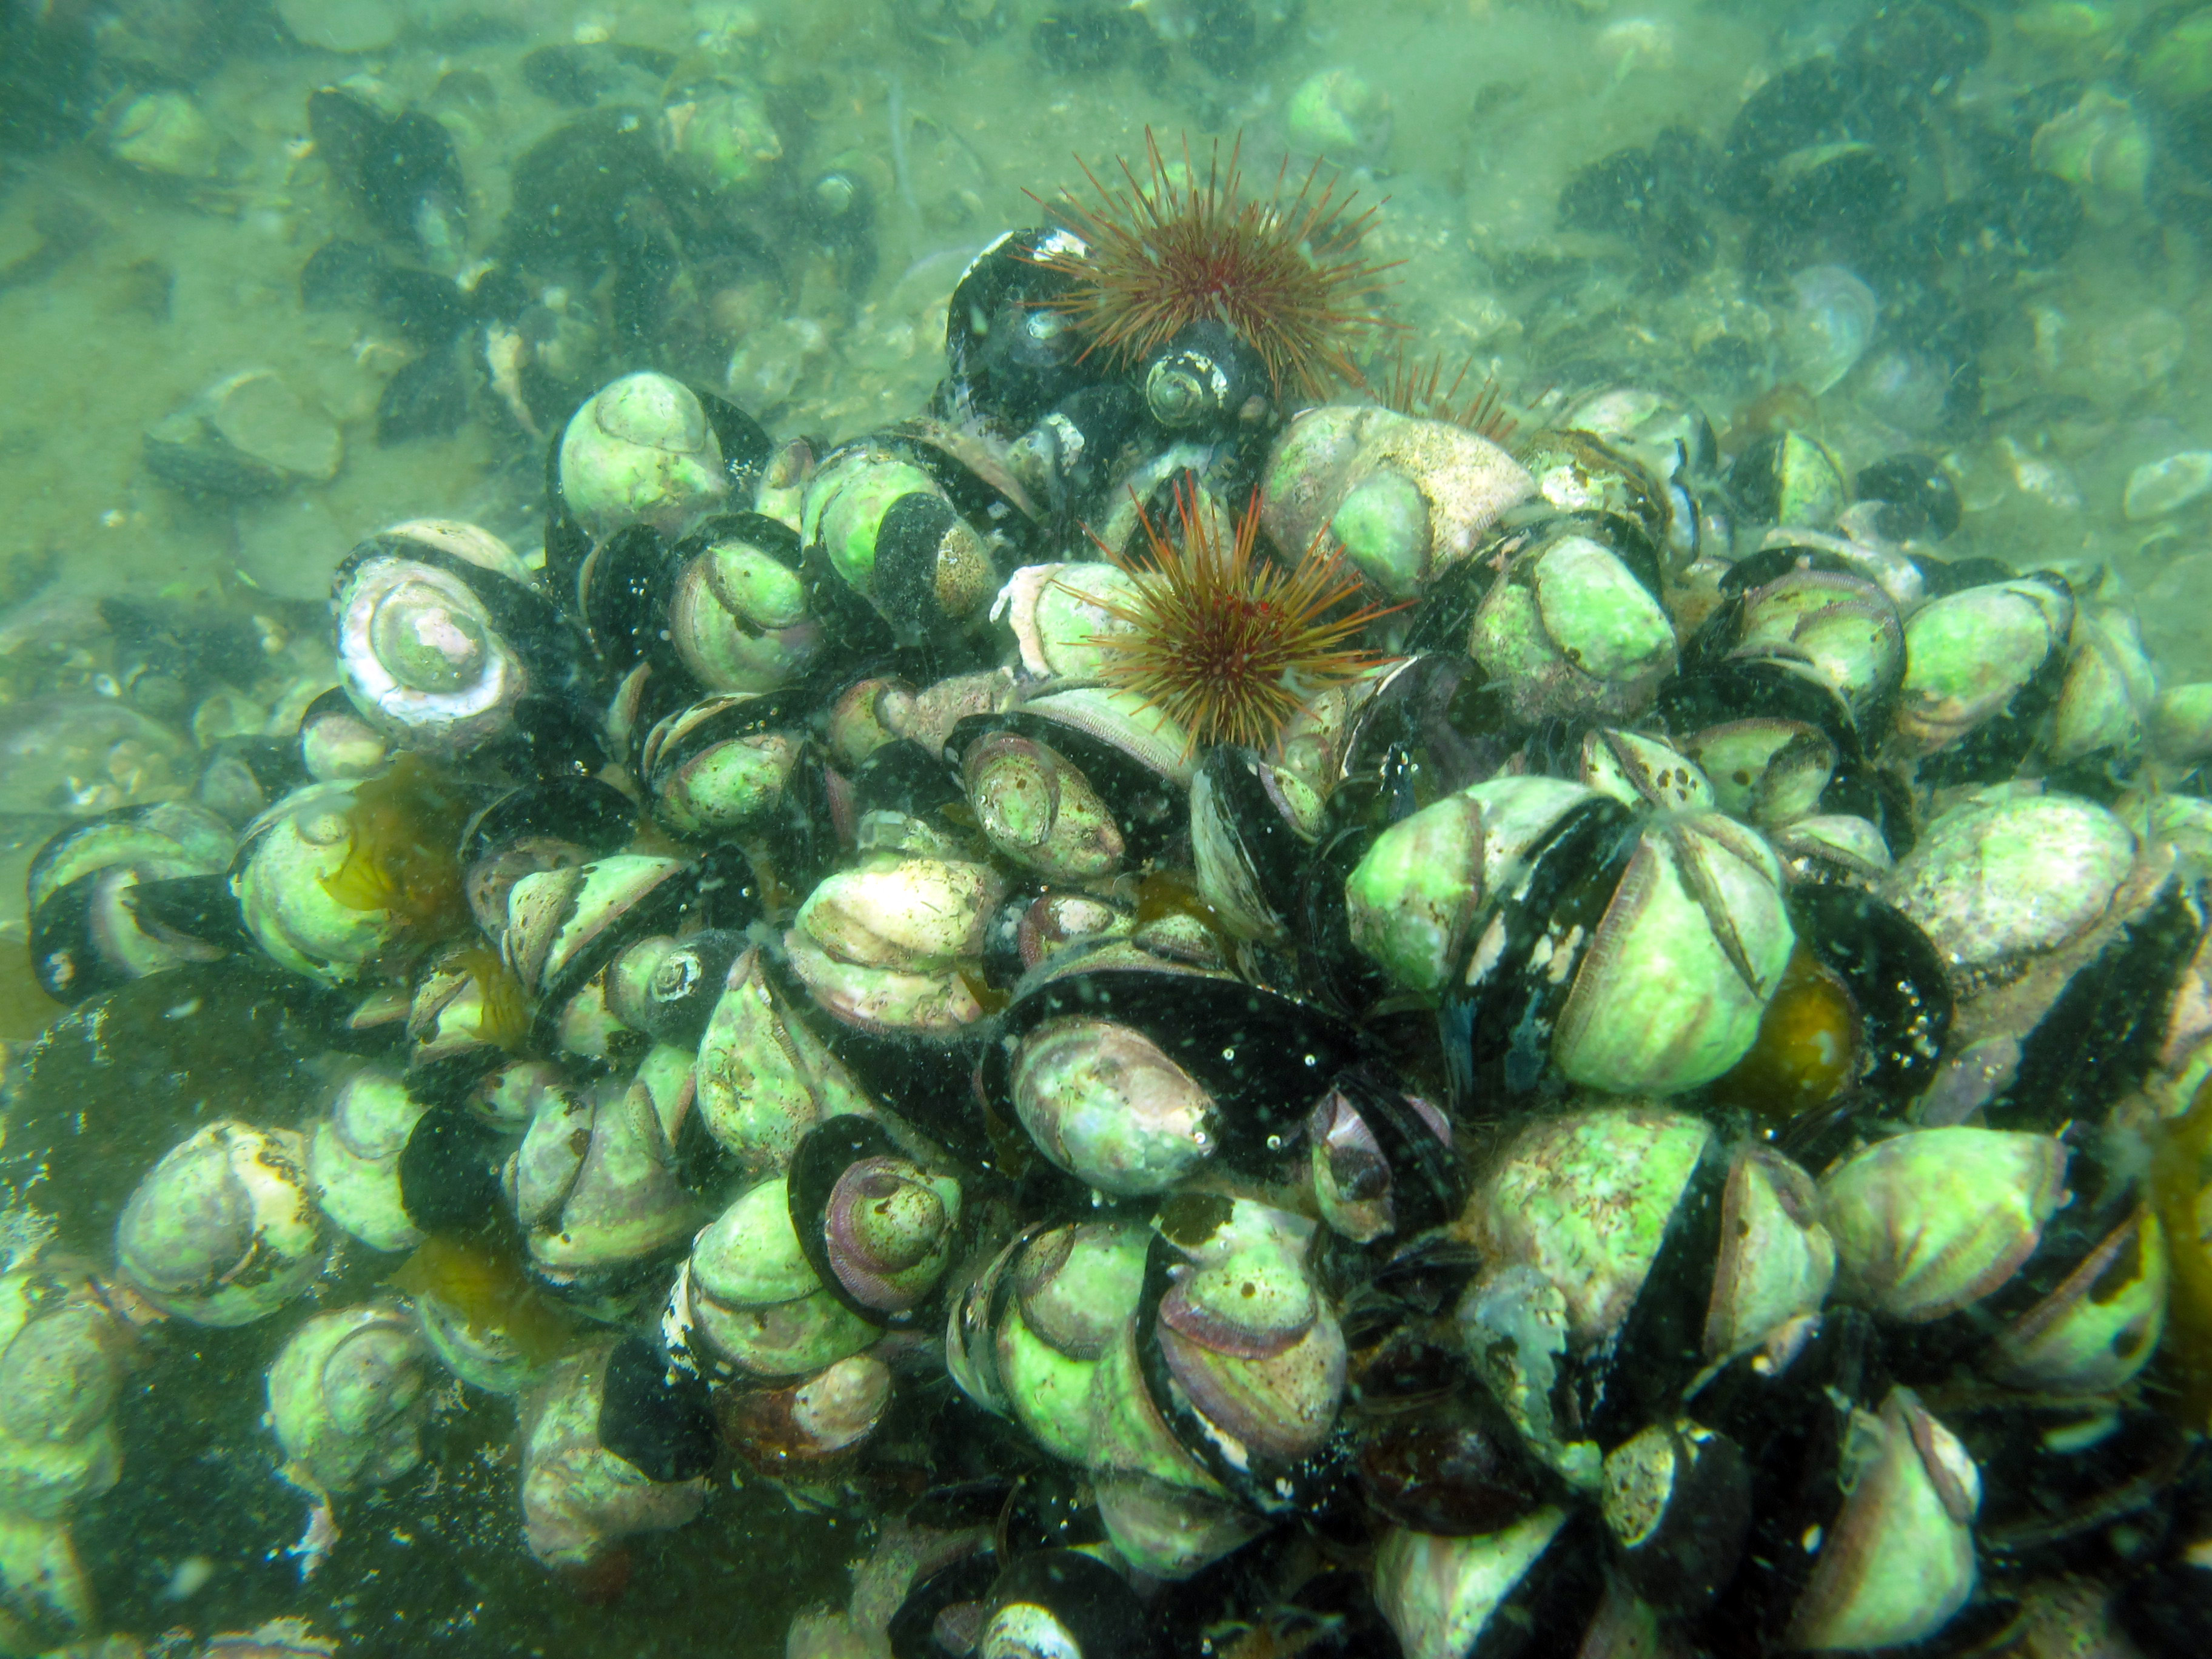 The subtidal community at Bahia Metri is based on a dense cover of mussels and slipper limpets, with Macrocystis recruiting to the invertebrates.